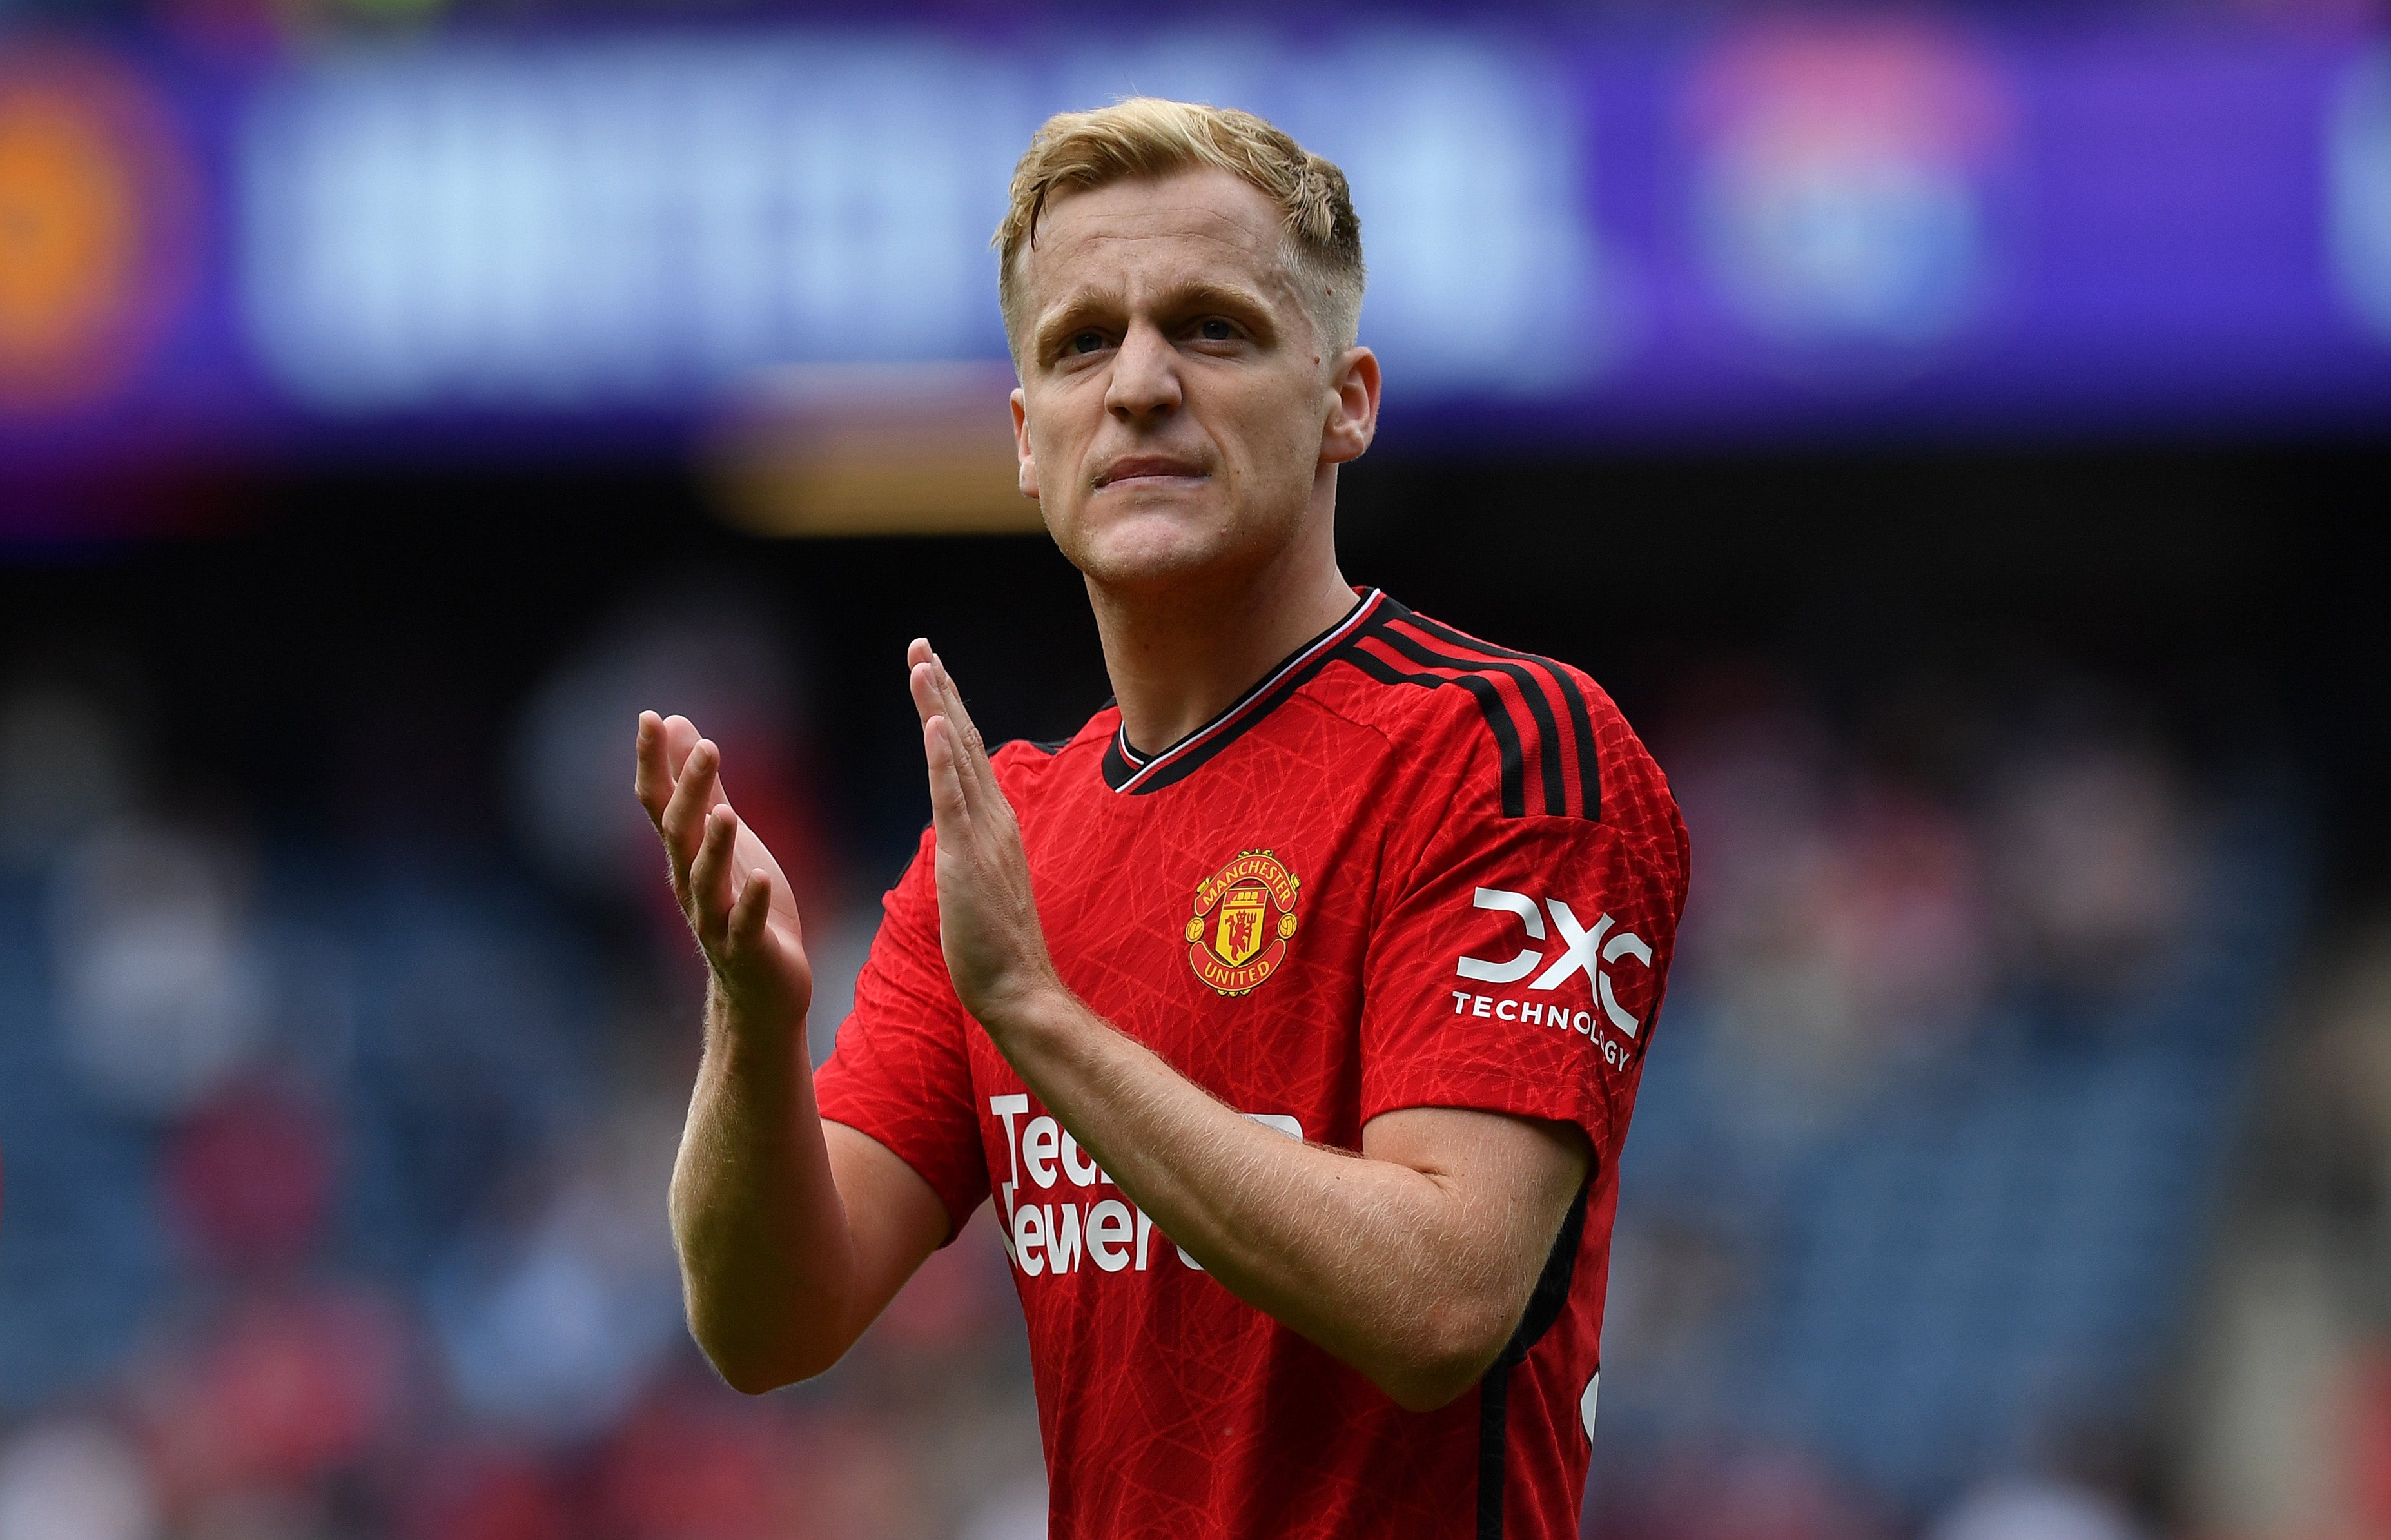 Donny van de Beek is set for a move away from Old Trafford in January